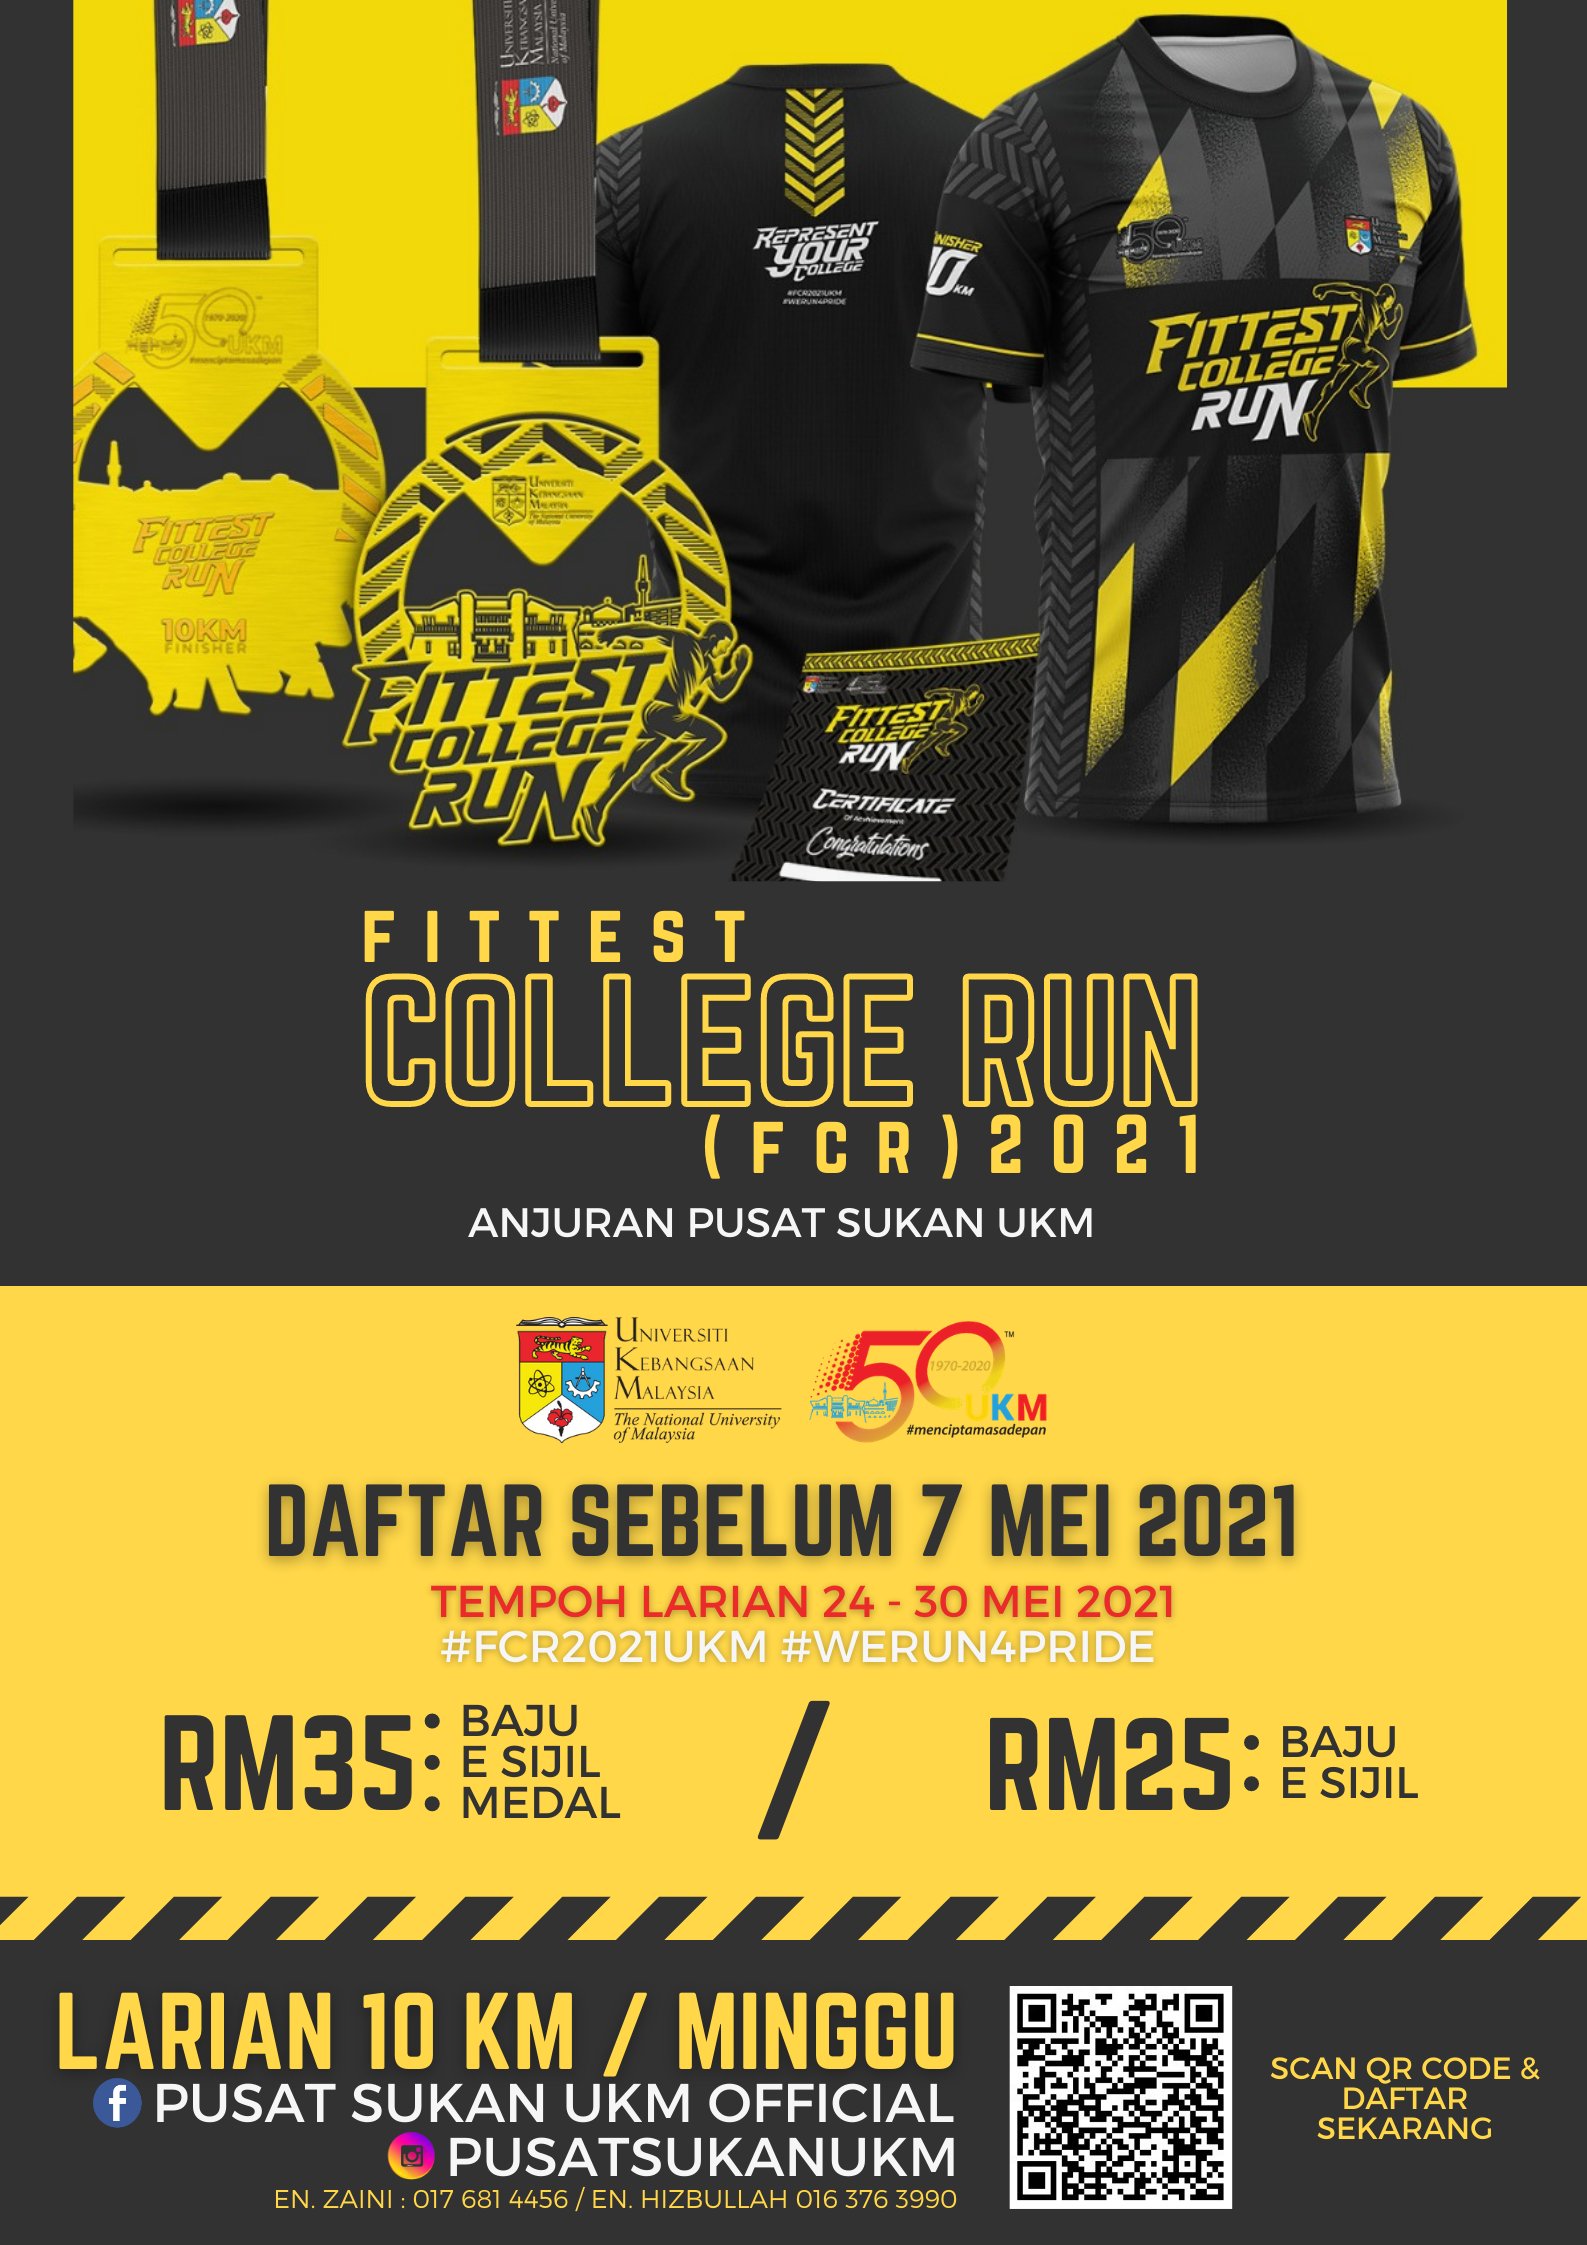 A virtual running program open to all UKM students.